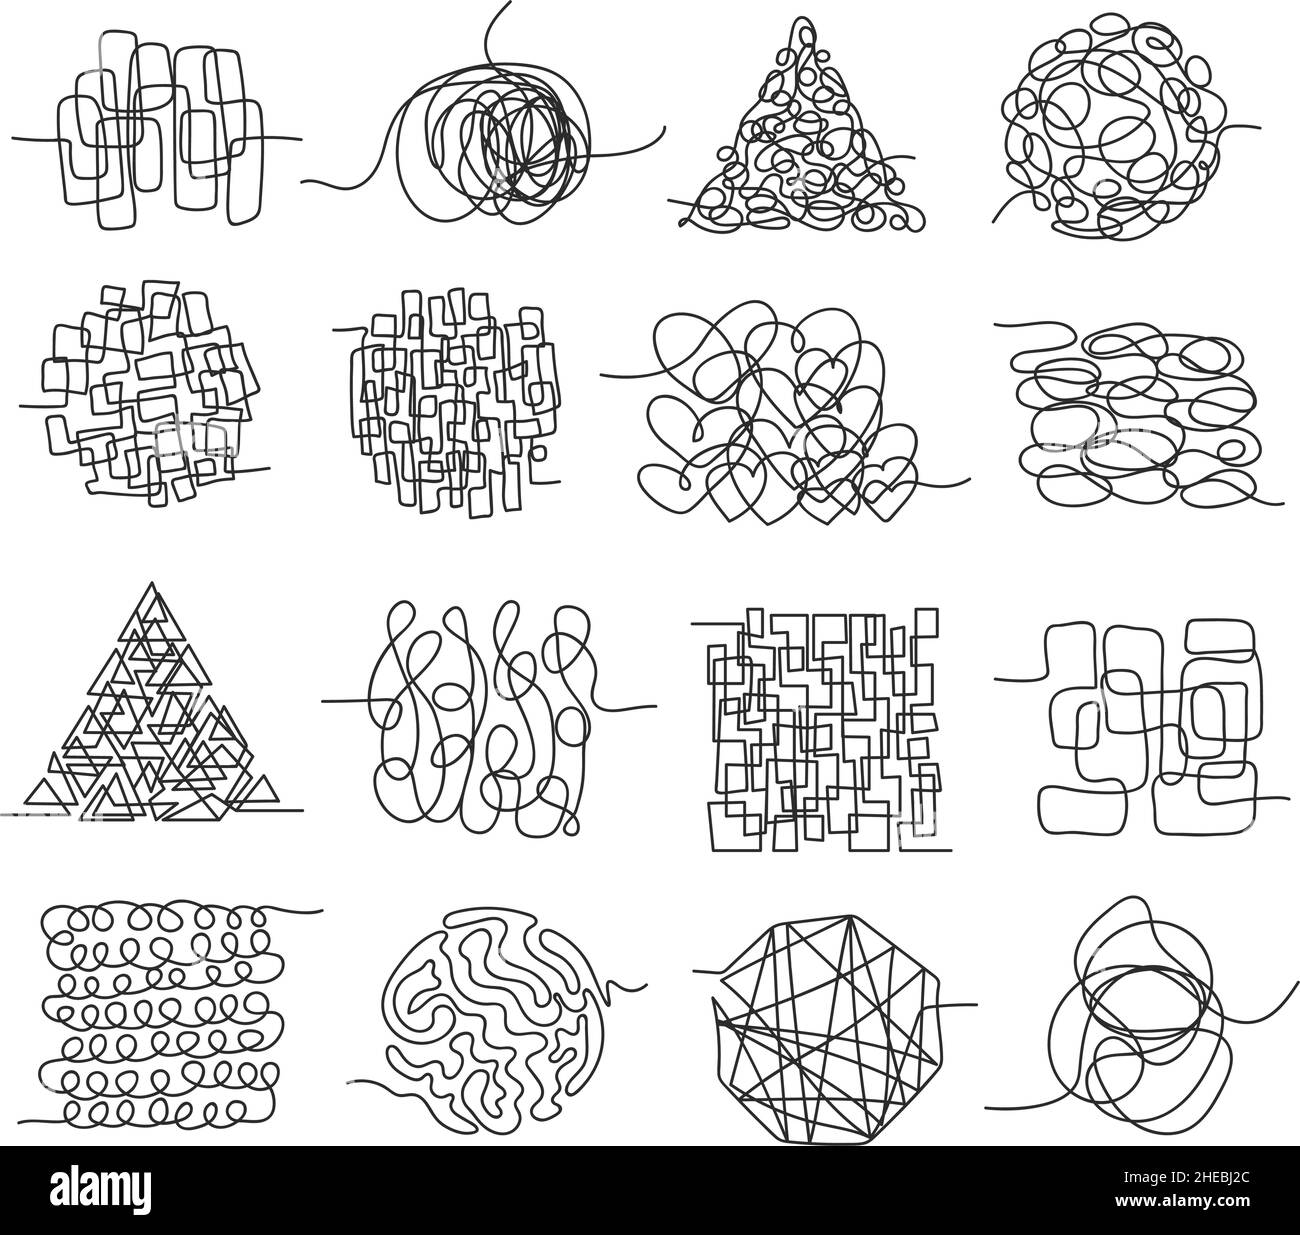 Tangled lines, chaos scribbles, messy squiggles and knots. Hand drawn chaotic doodles, entwined tangle scrawl, random scribble Vector set. Complicated thoughts and ideas, curled maze Stock Vector